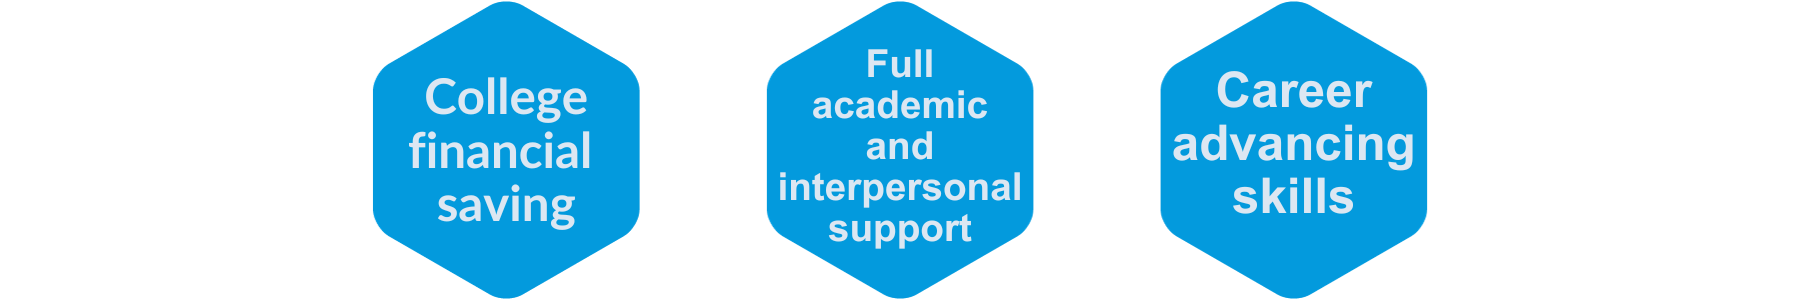 College financial saving, full academic and interpersonal support, career advancing skills